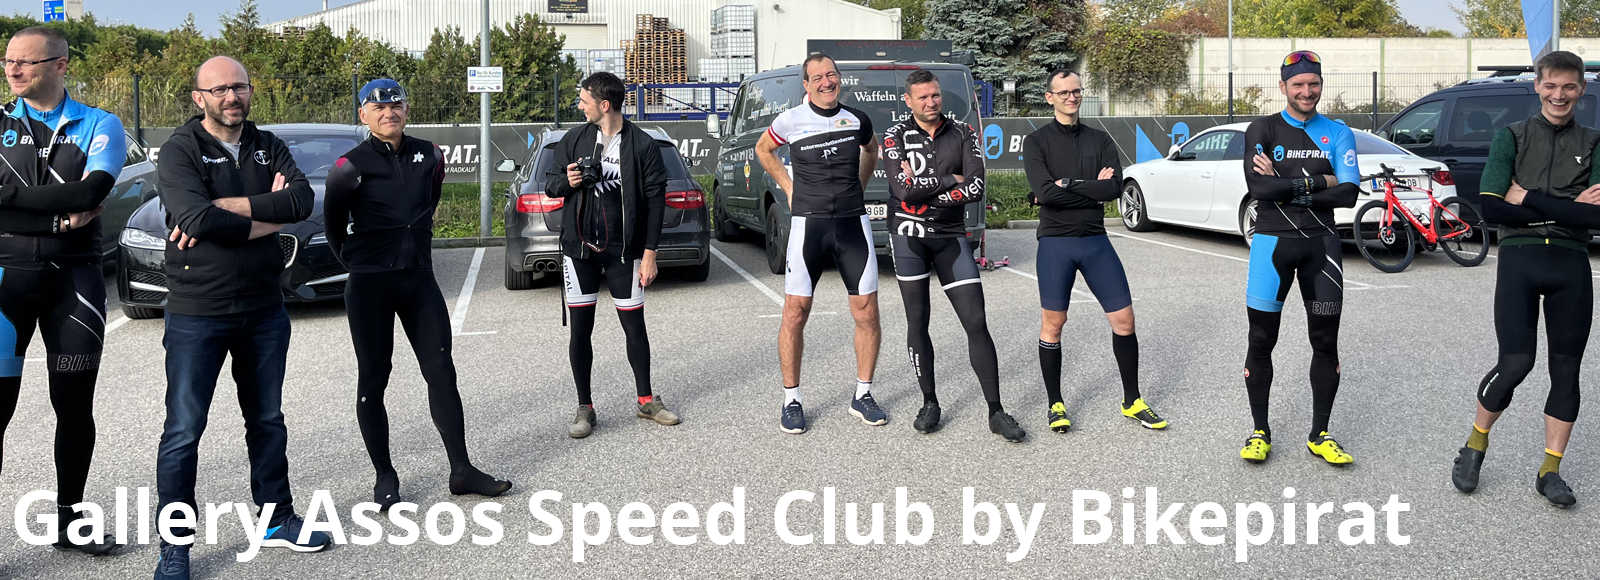 Assos Speed Club powered by Bikepirat (& supported by WCT)